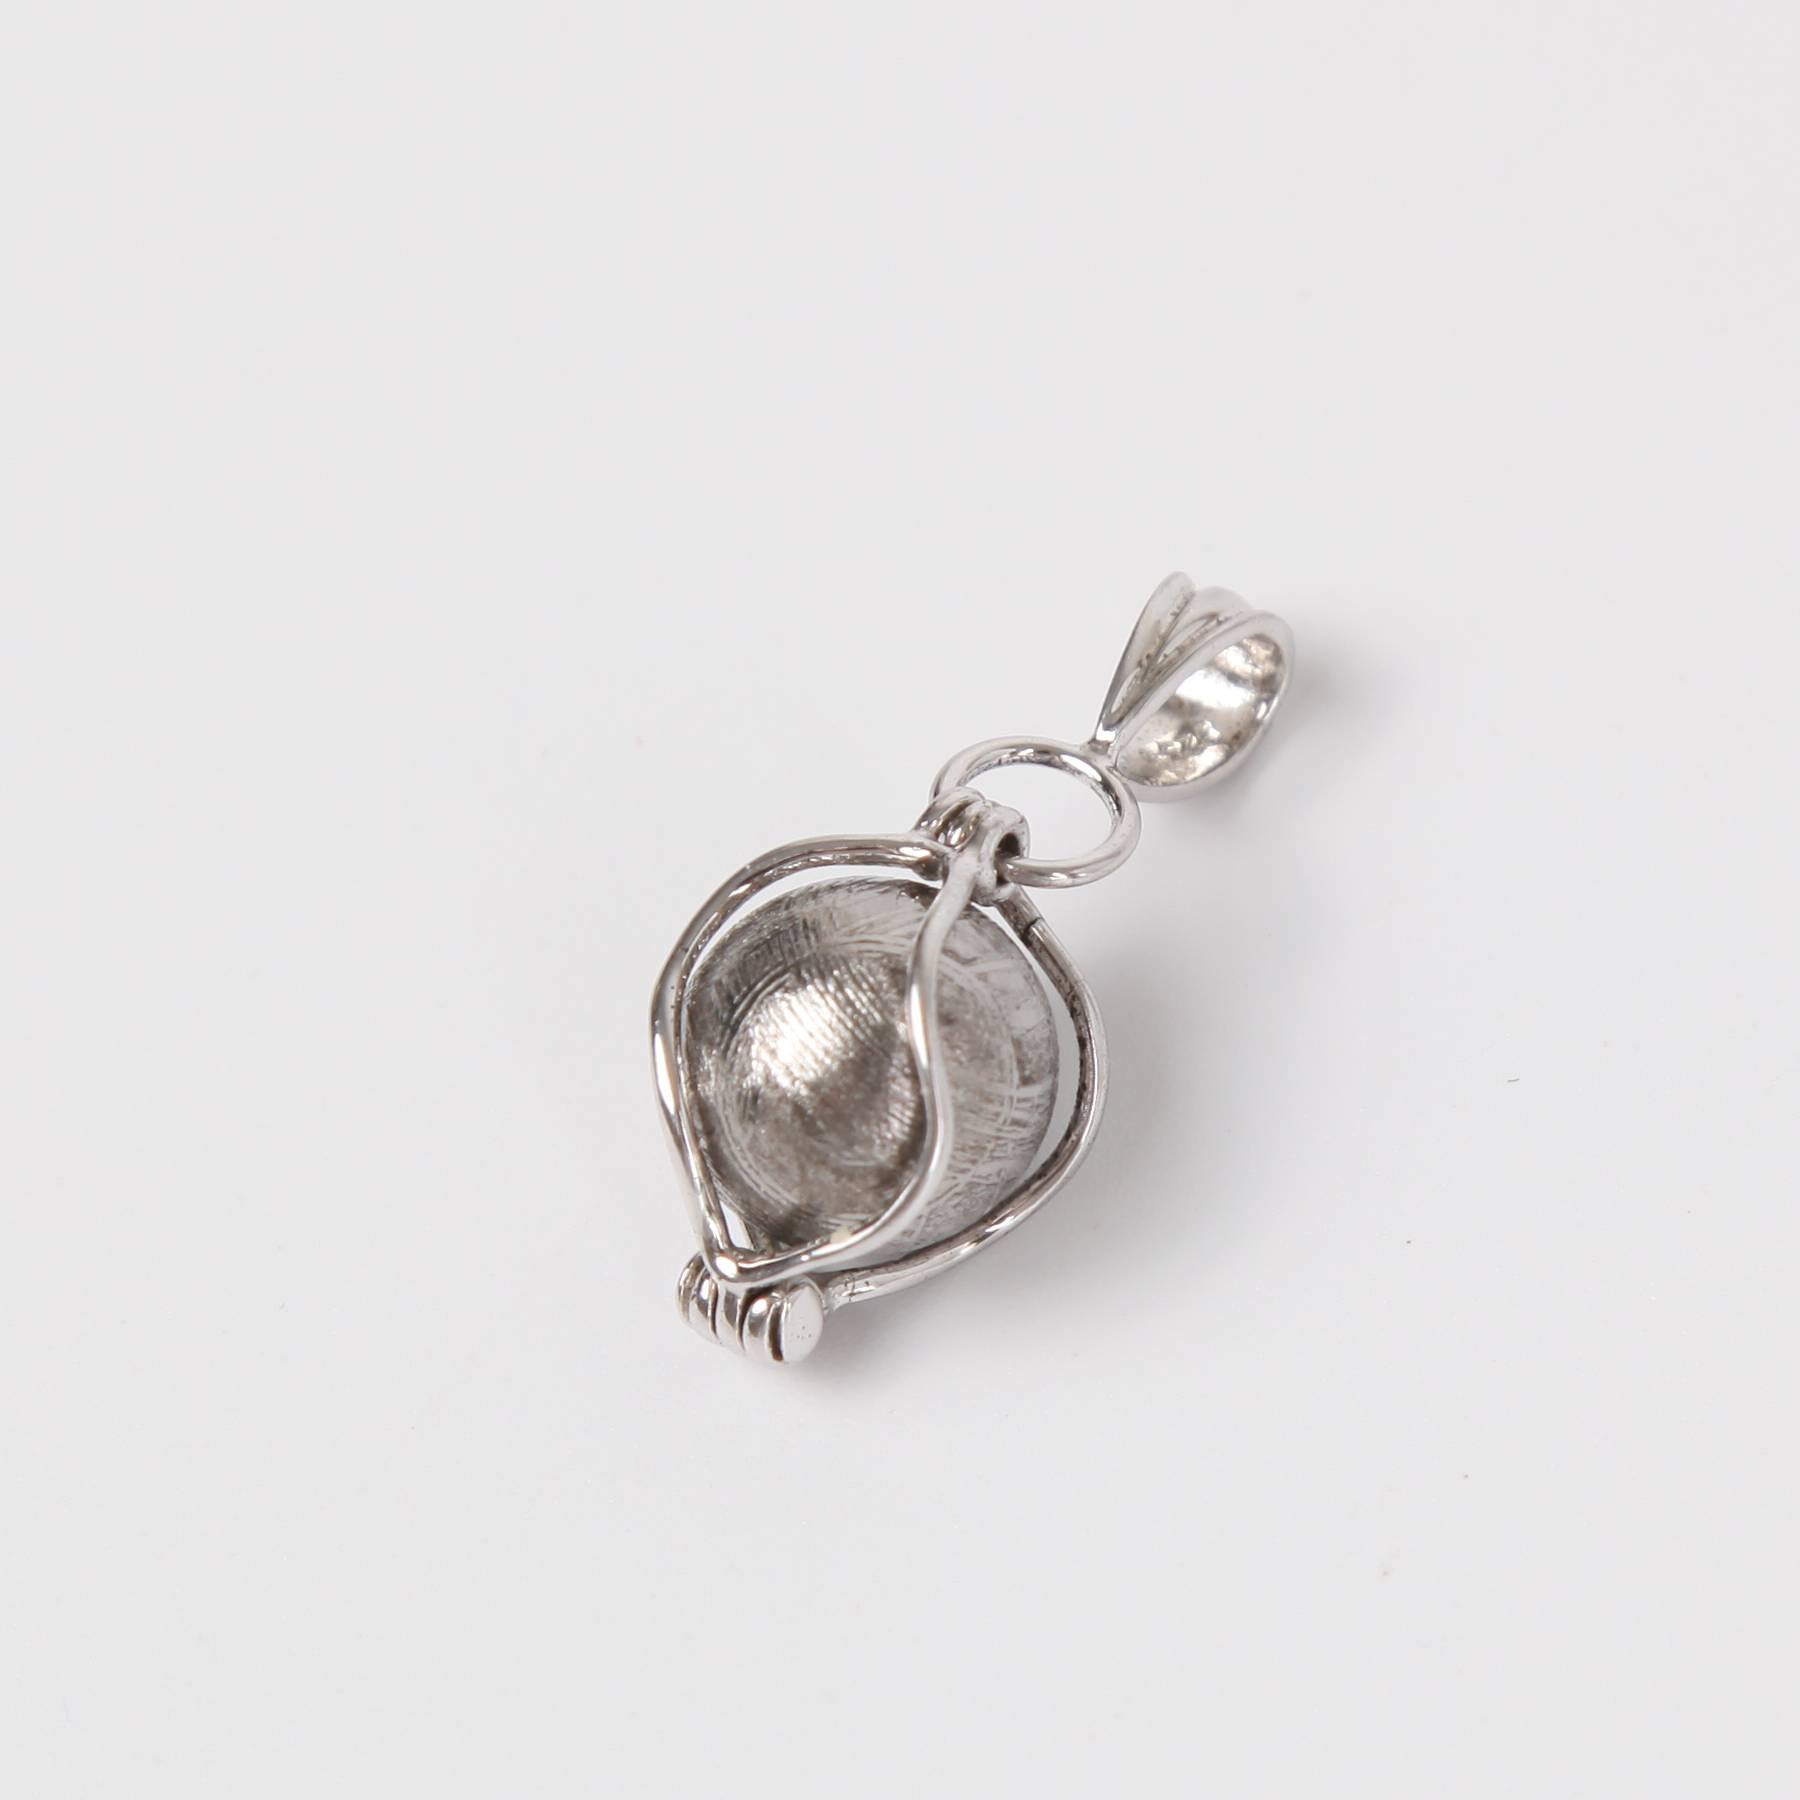 Iron Nickle Meteorite Pendant with Sterling Silver Circle